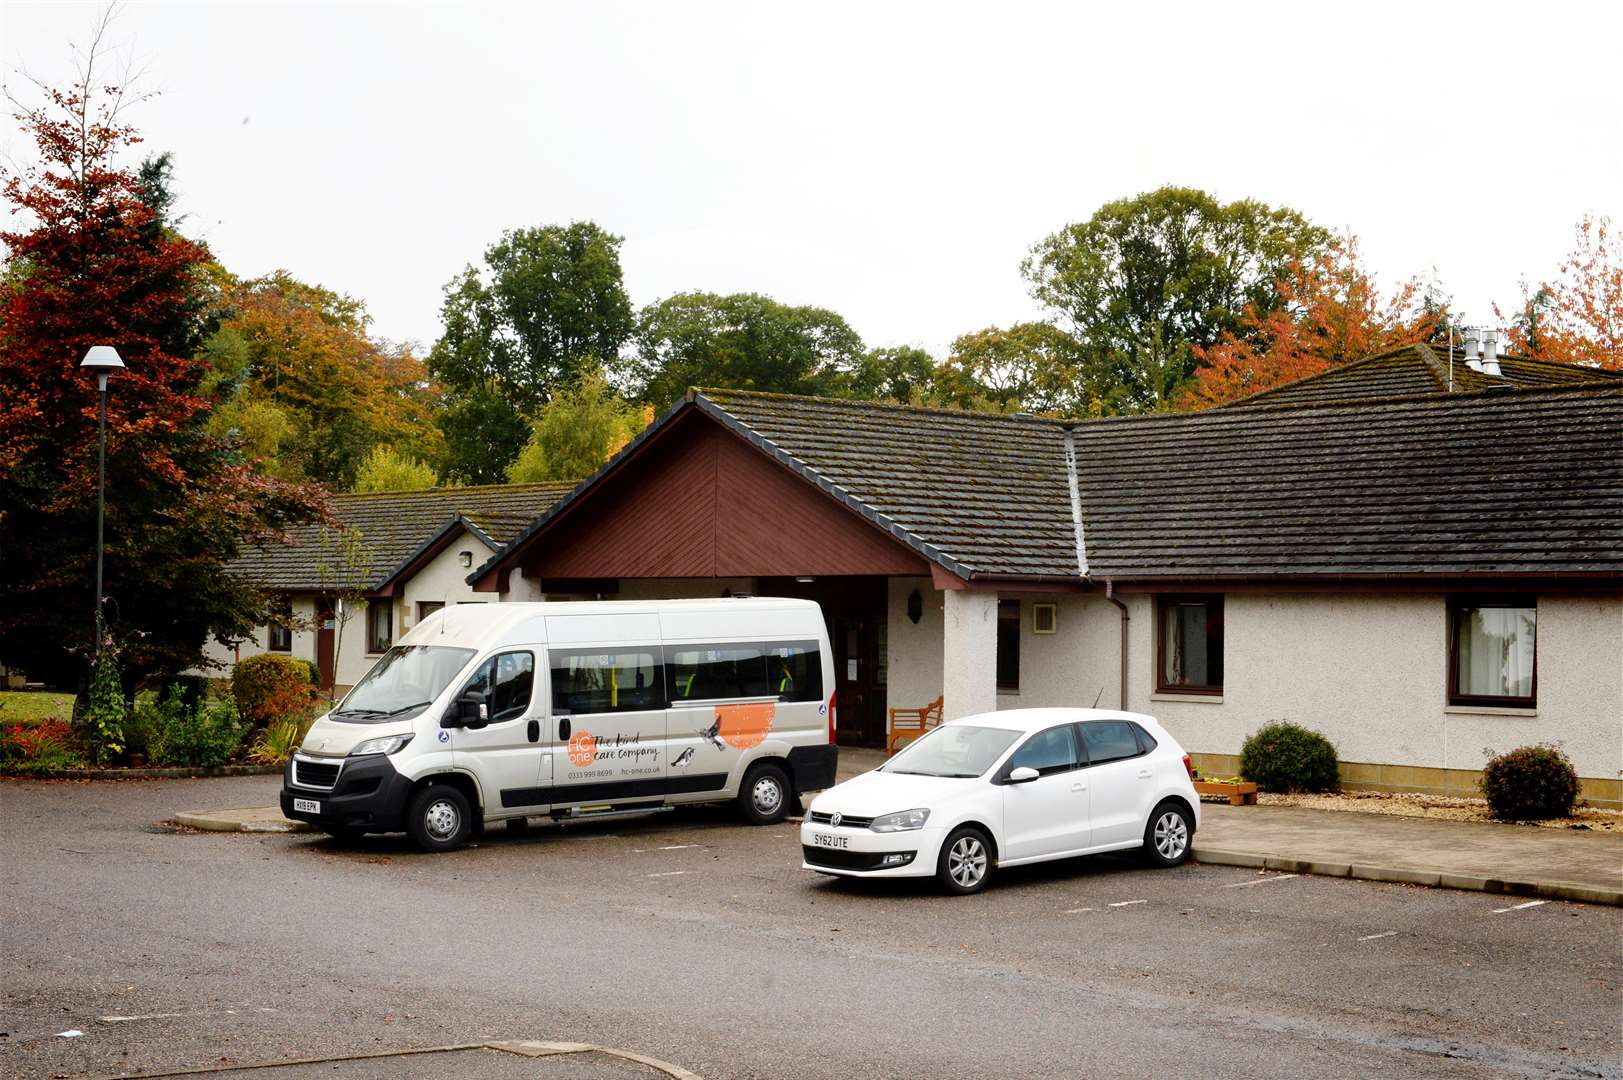 Cradlehall Care Home which is run by operator HC-One.